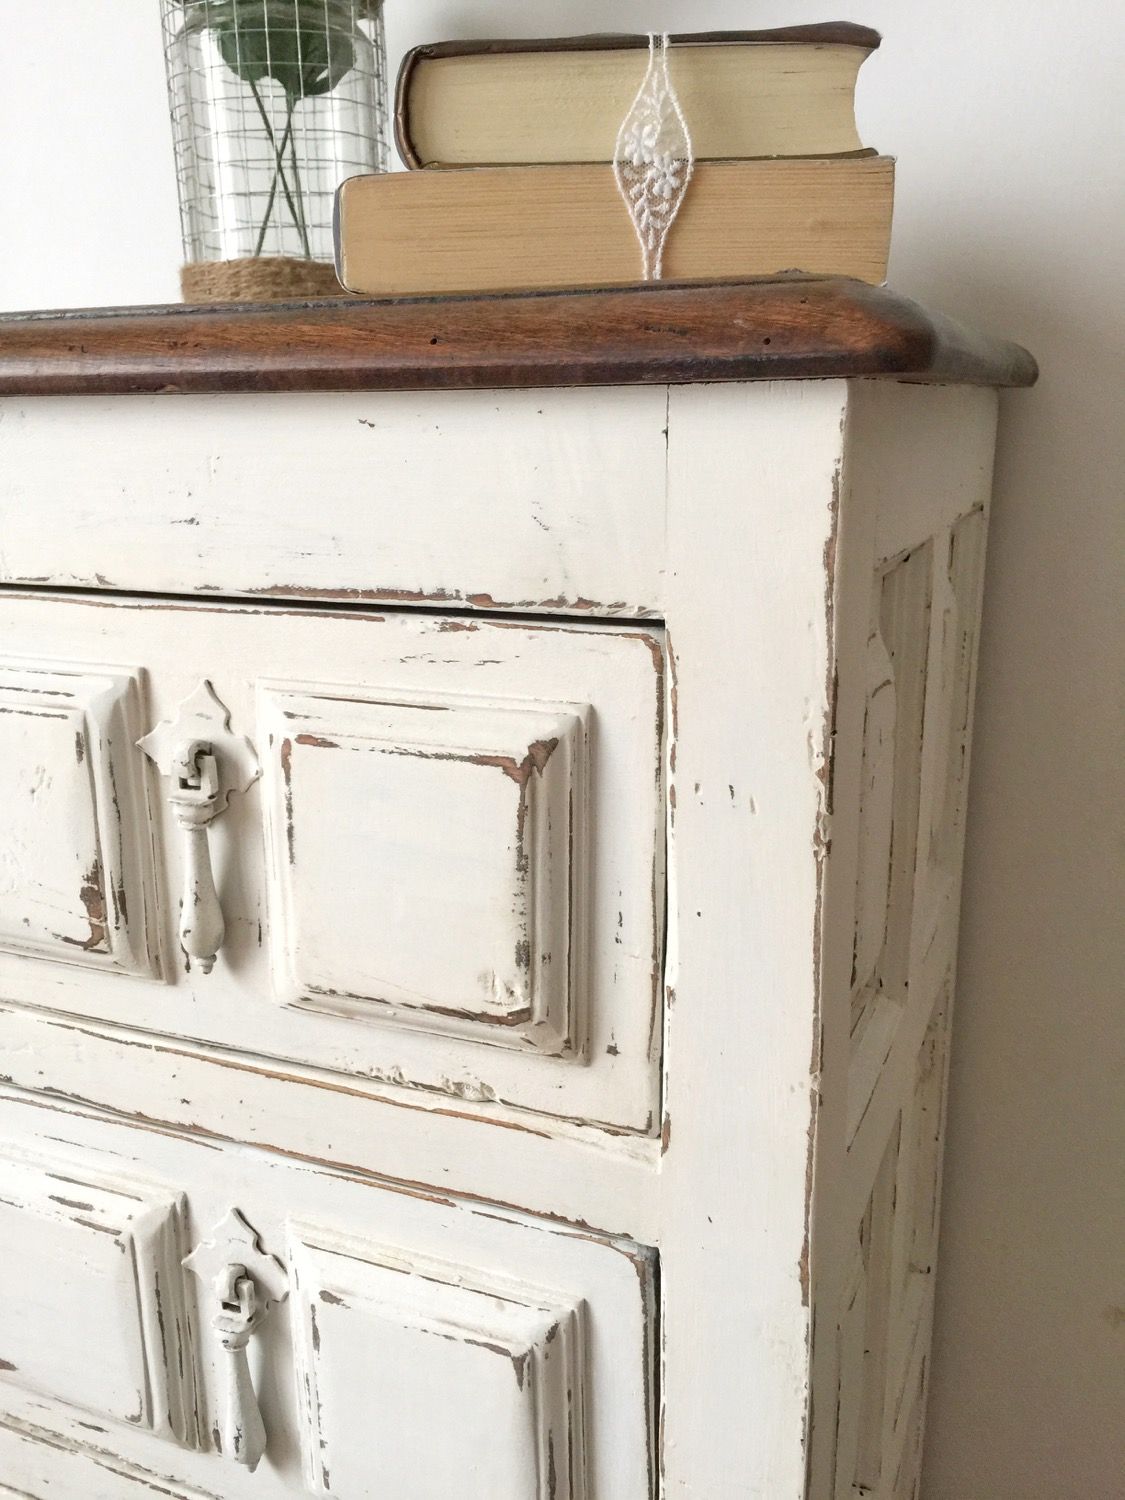 Farmhouse Style Side Table · Painting with DIY chalk paint · Distressed furniture · Via www.sweethings.net